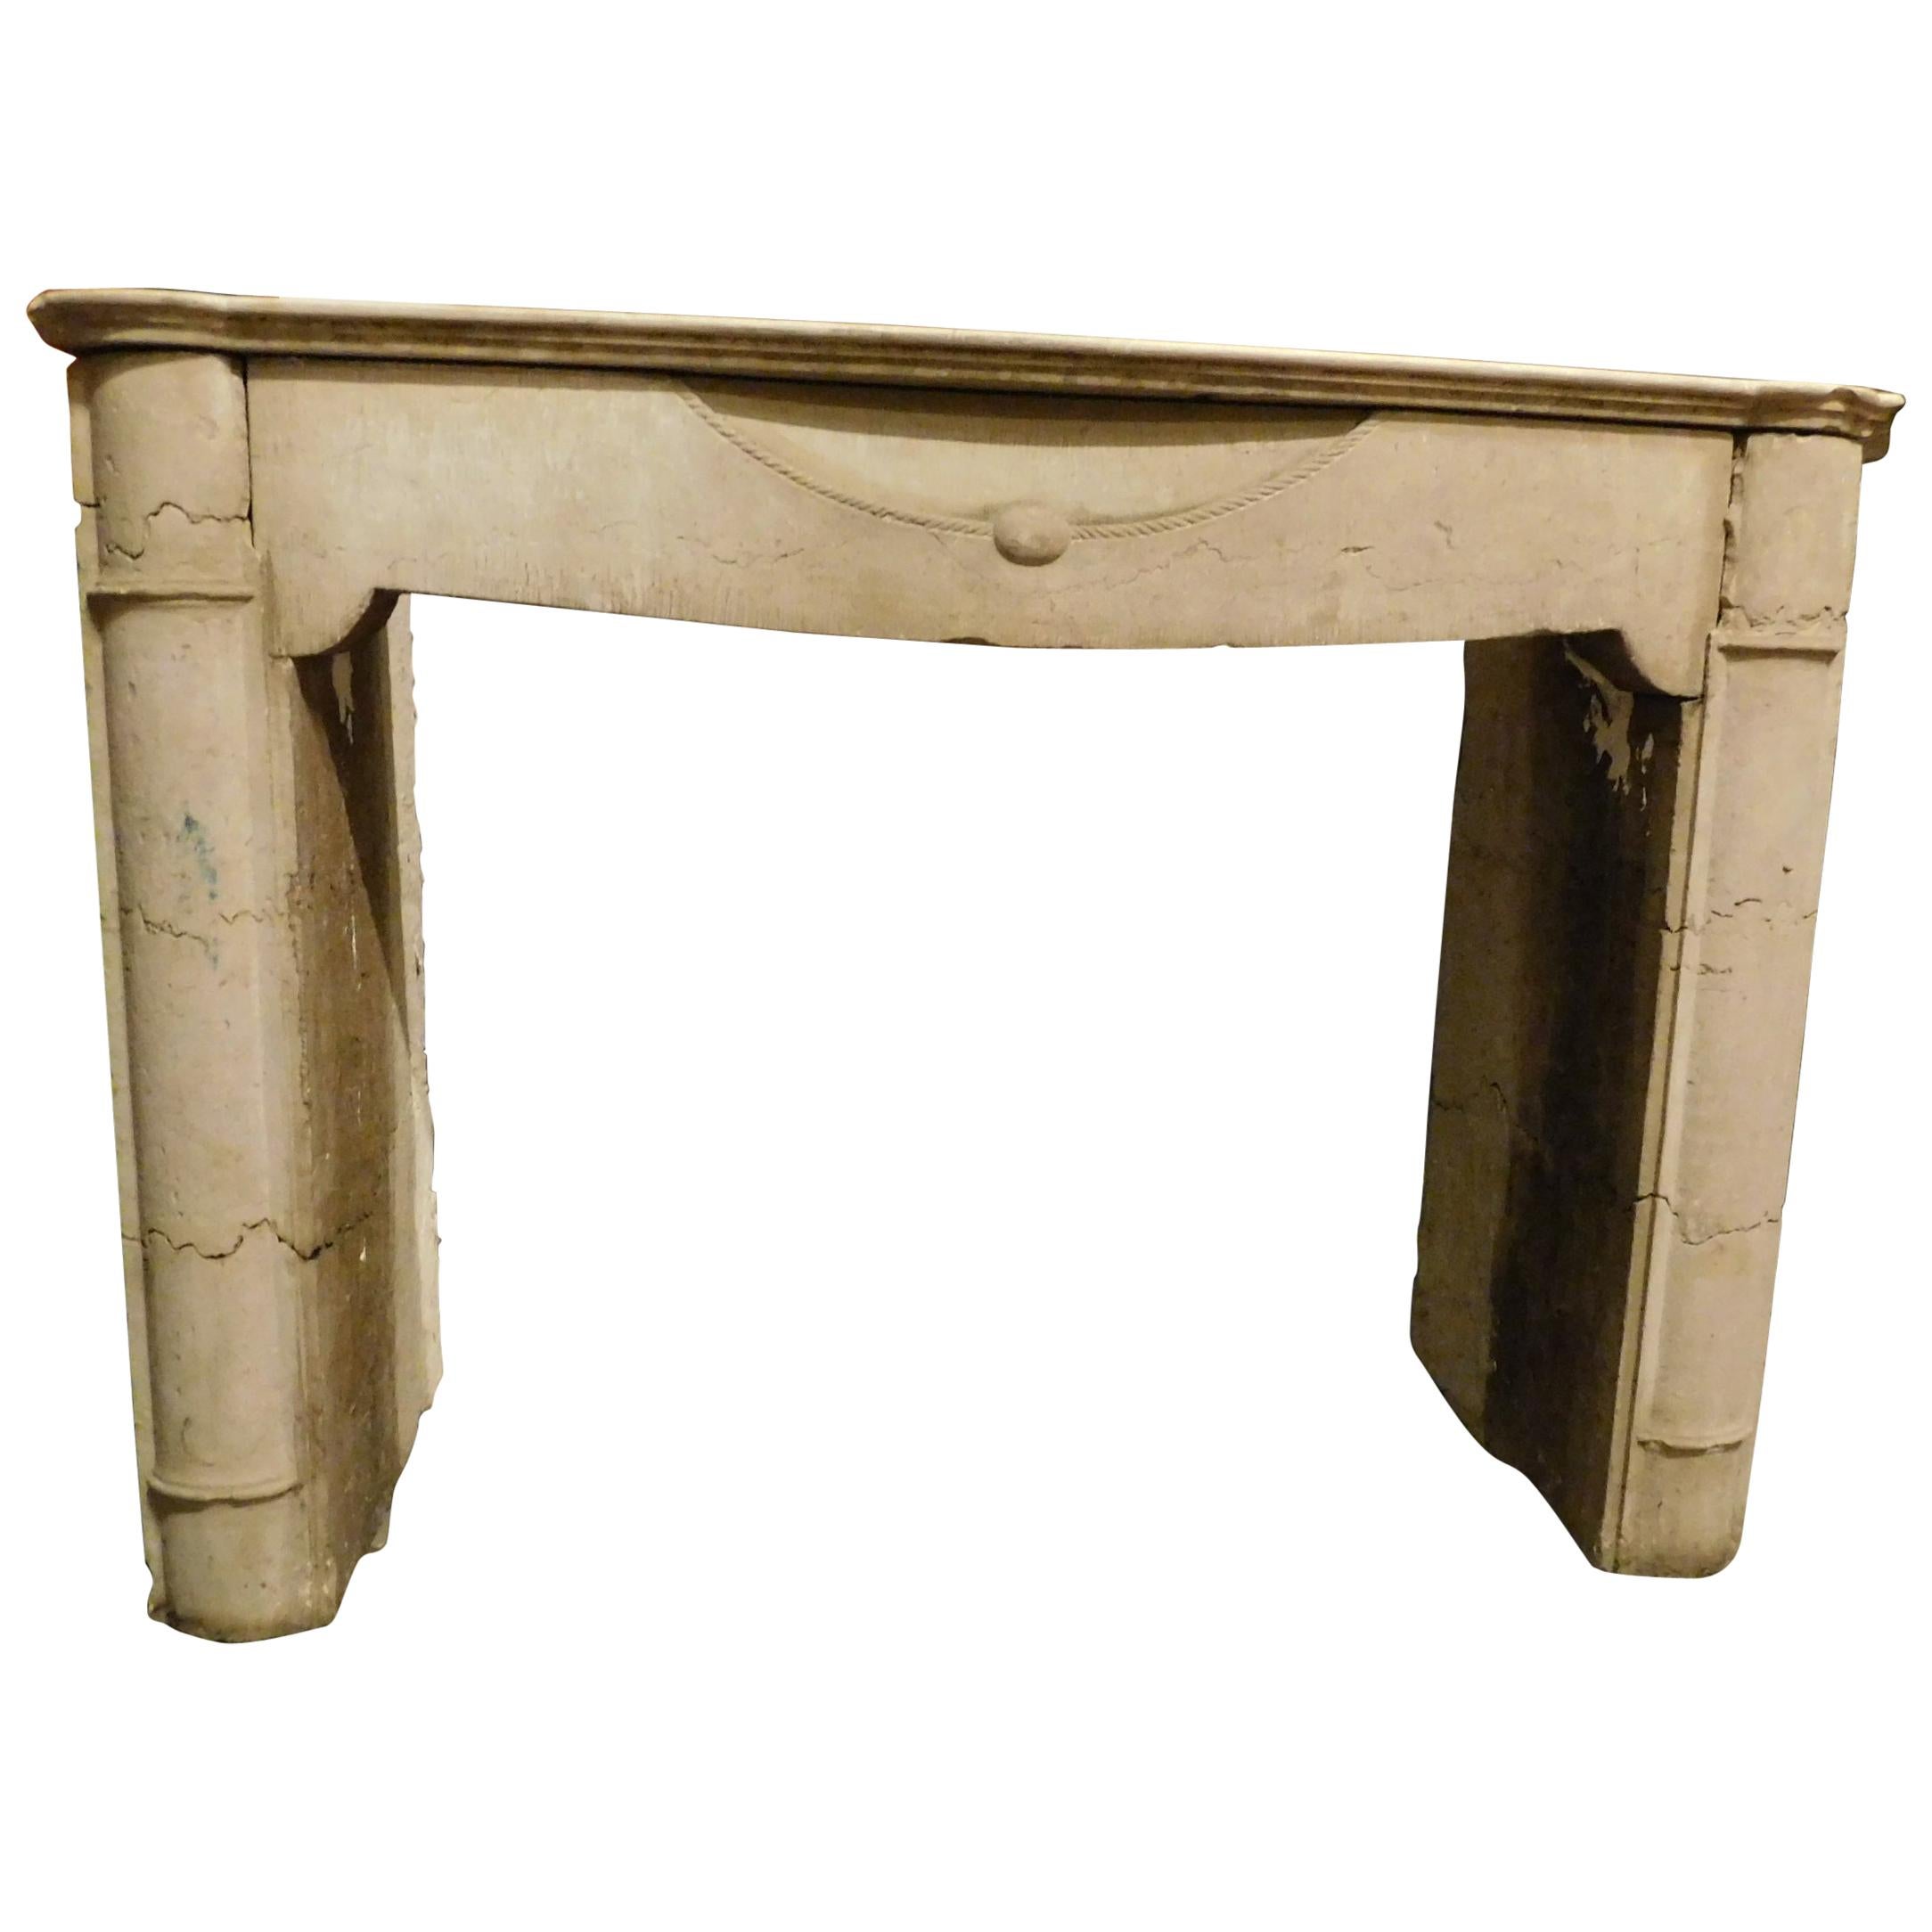 Antique fireplace in travertine stone, neoclassical, '800 Italy